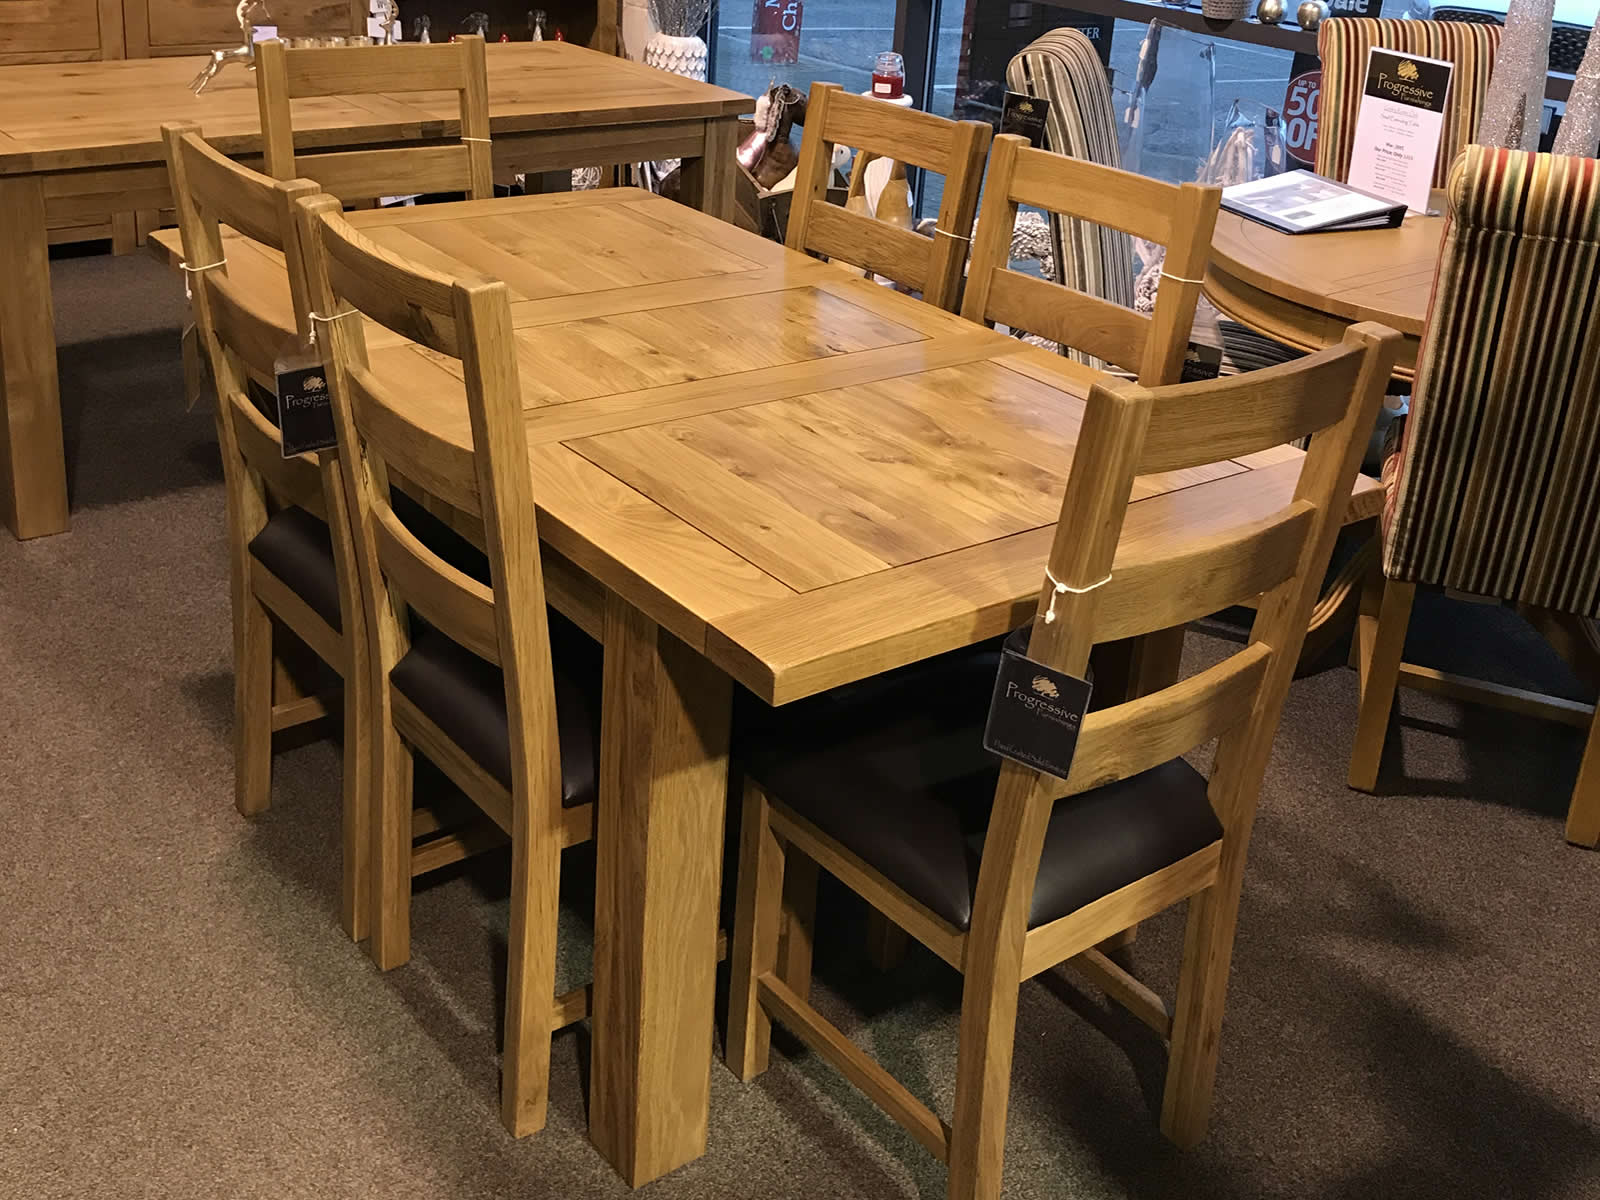 Rustic Oak Dining Table With 6 Chairs Is Part Of The Loxley Oak Range